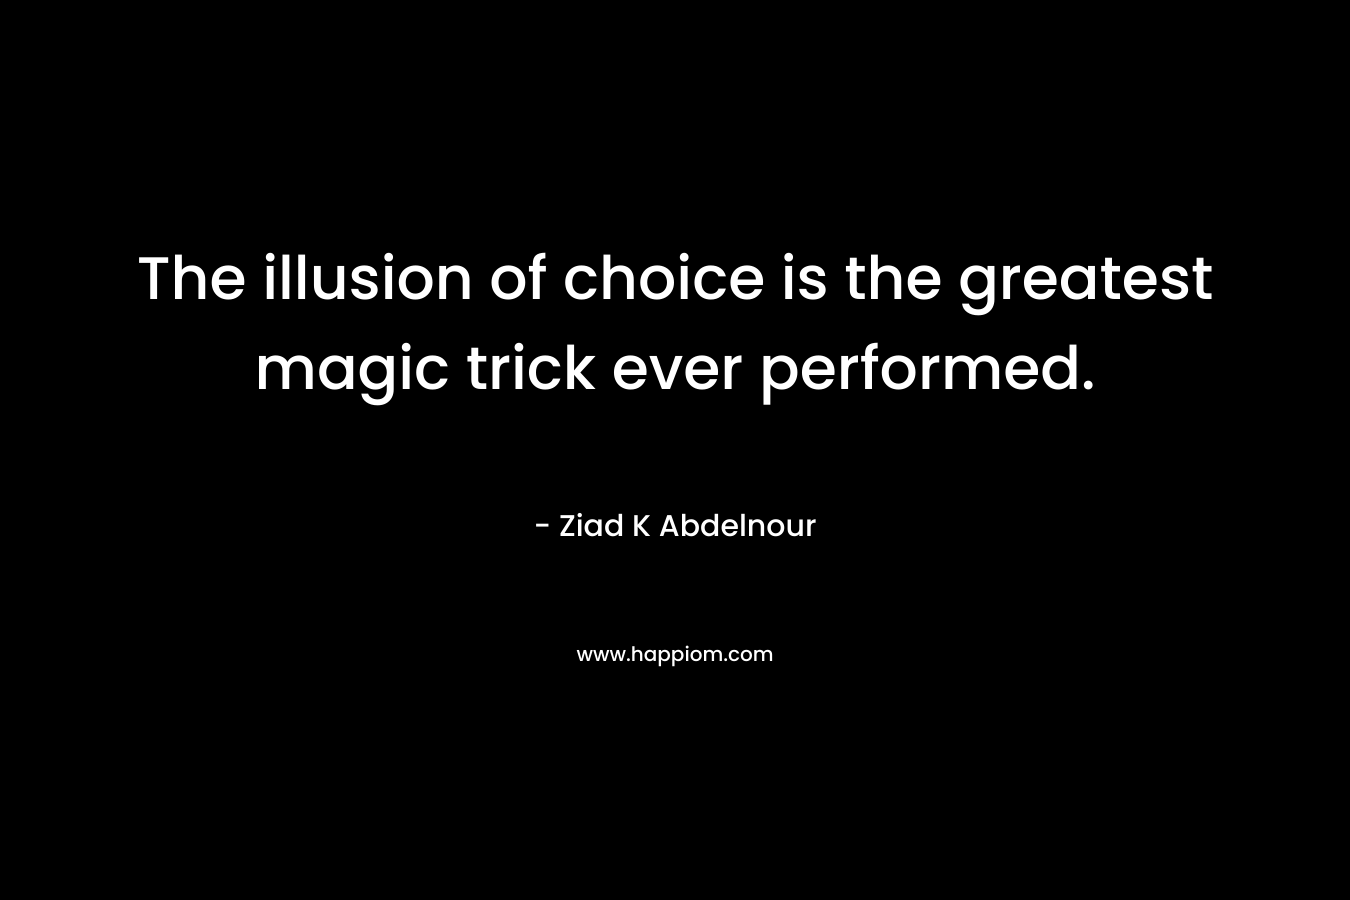 The illusion of choice is the greatest magic trick ever performed.